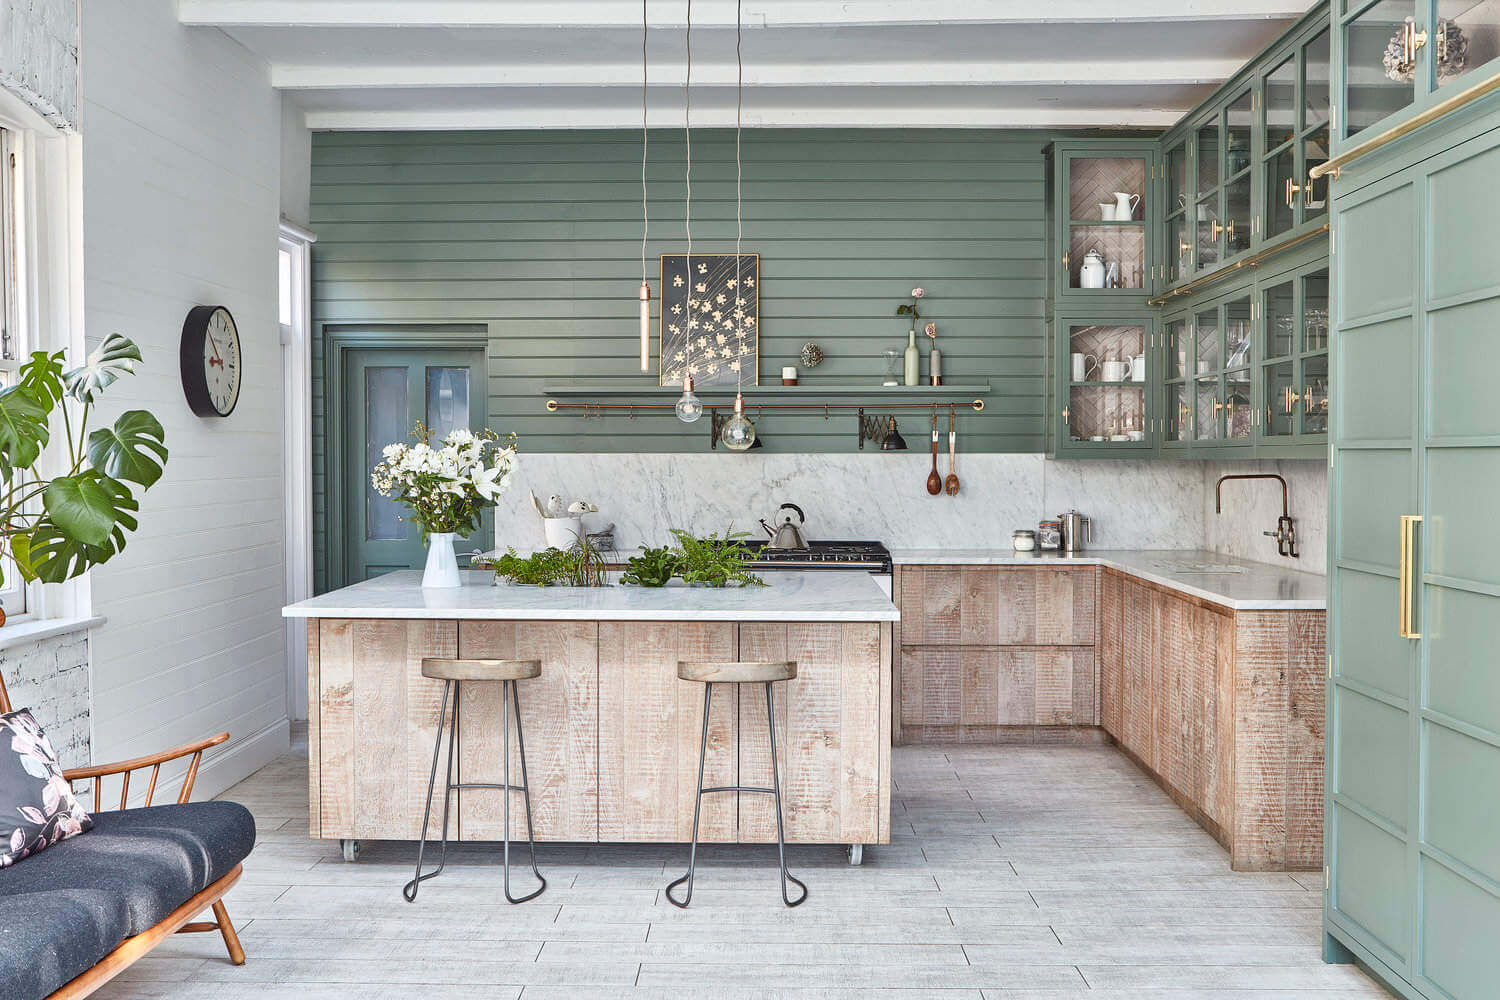 The perfect kitchen gets a makeover